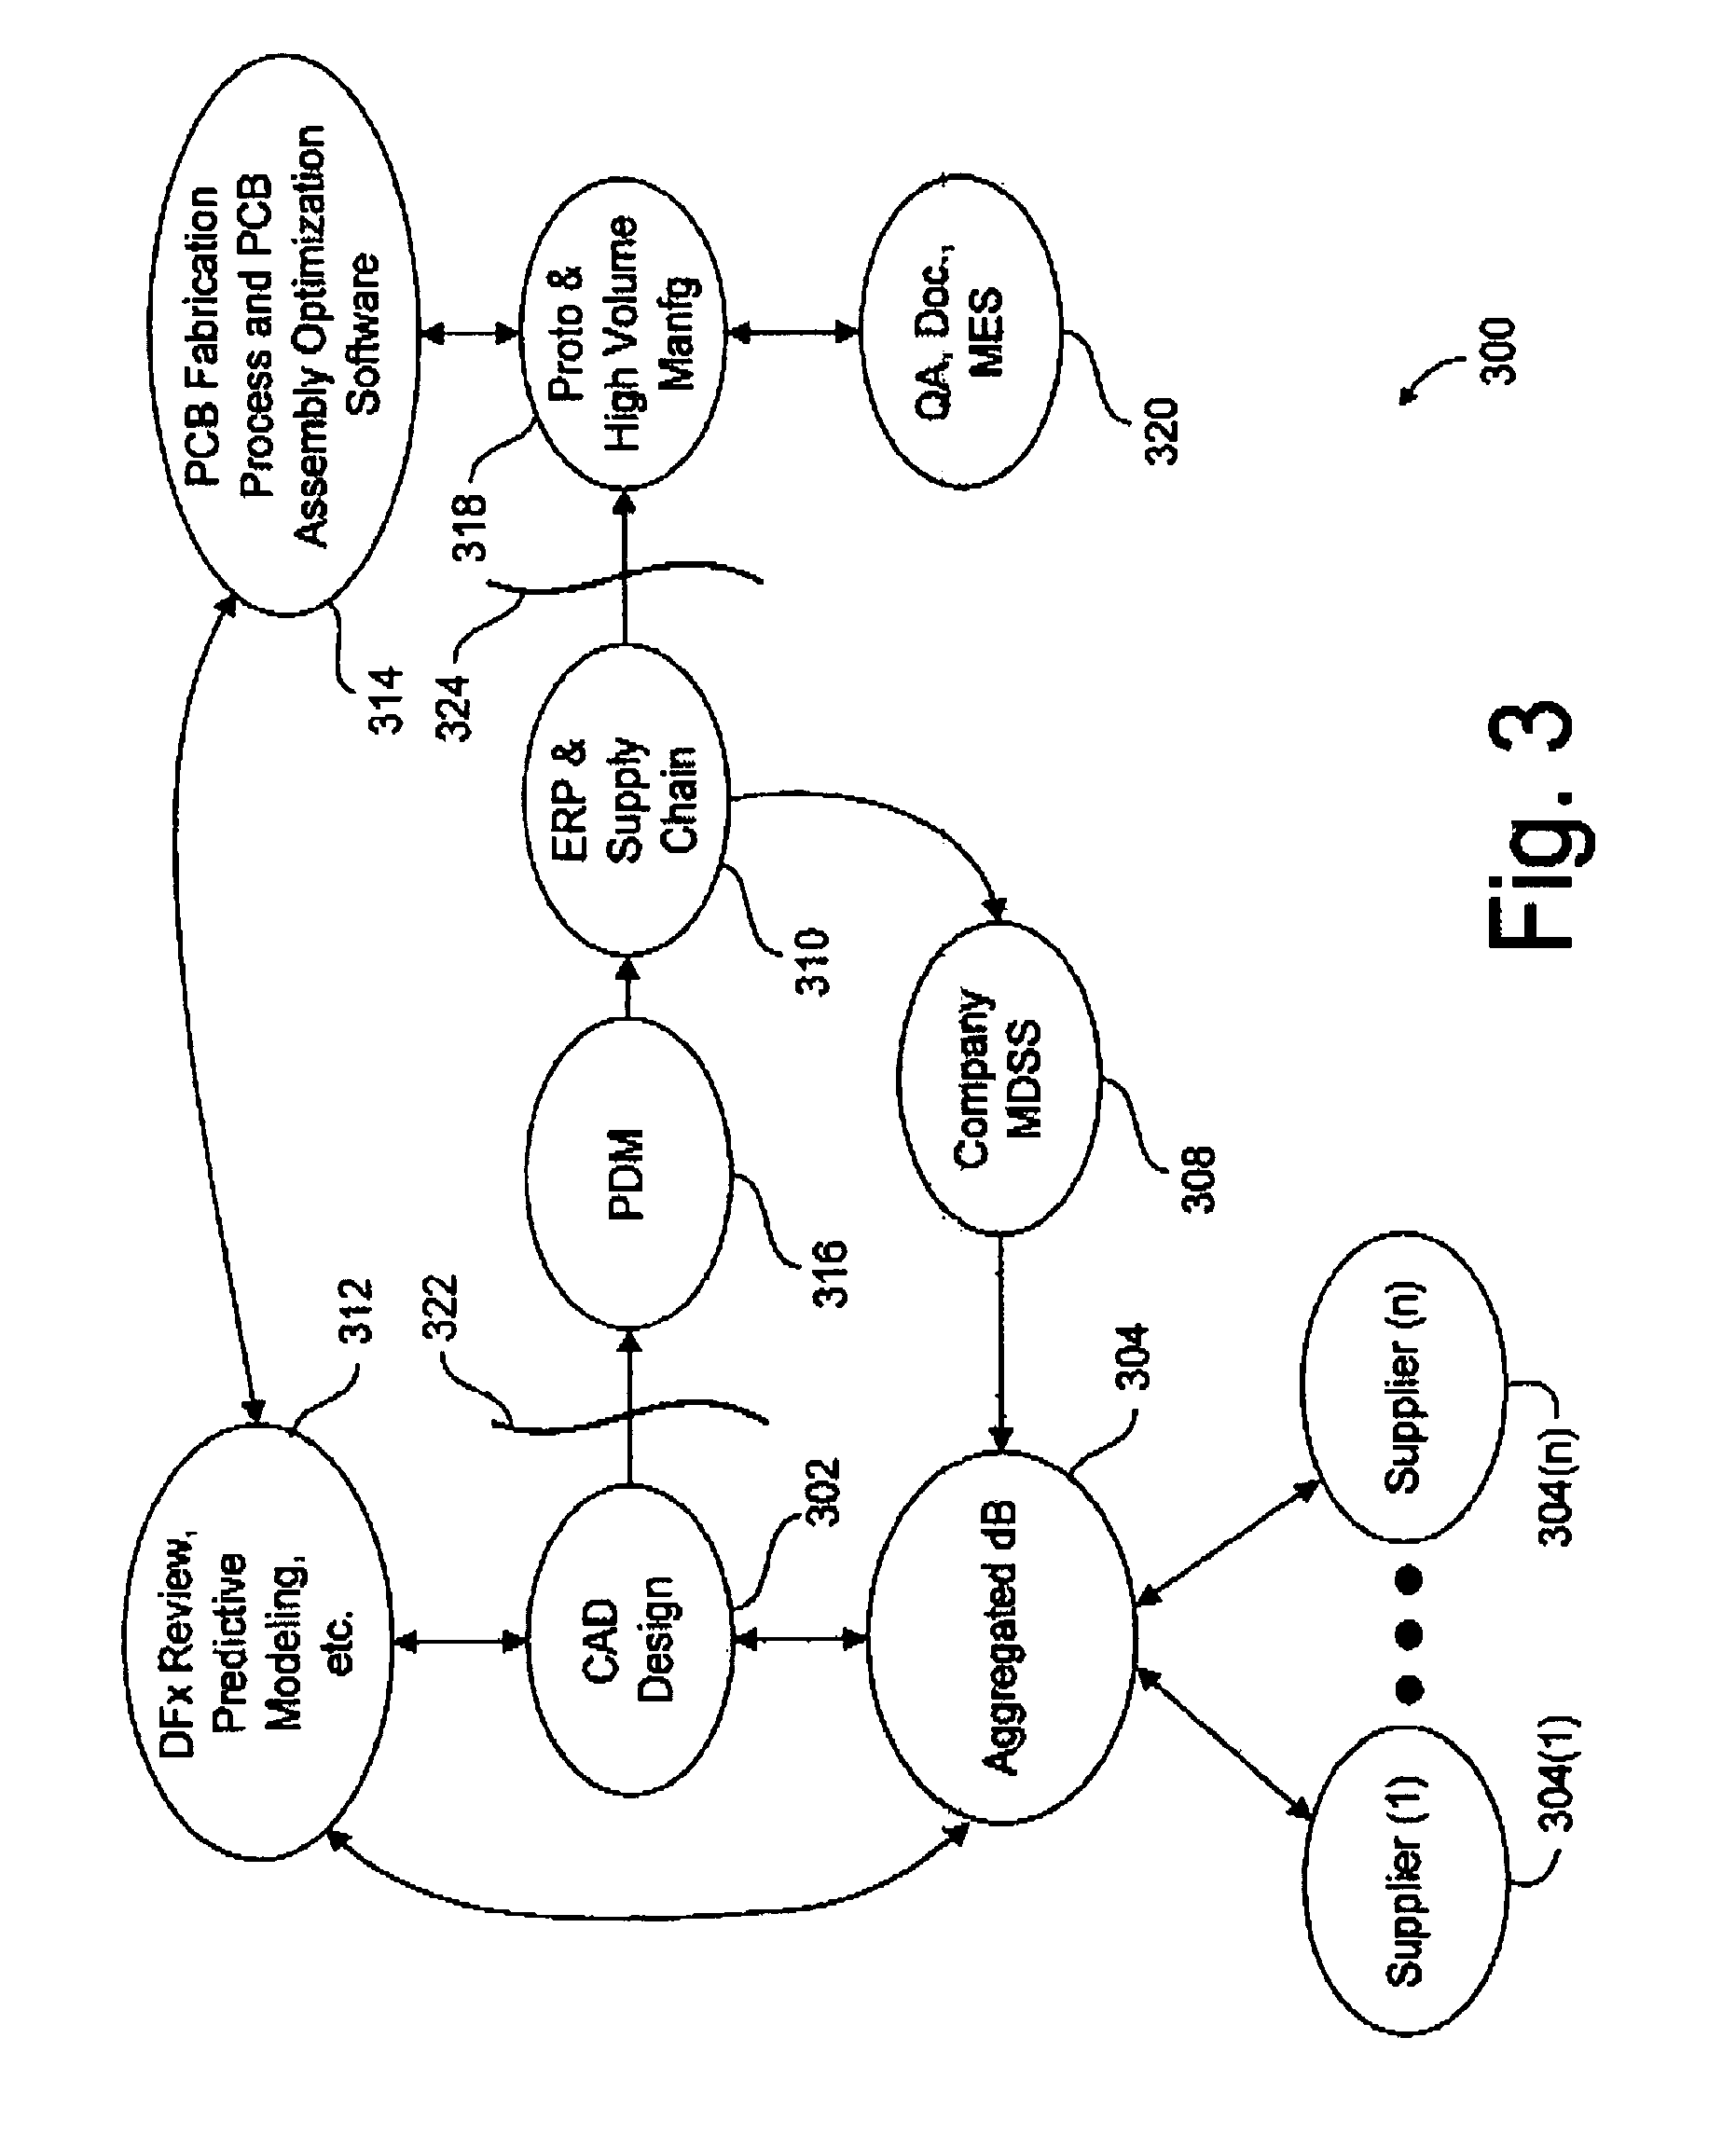 System and method for design, procurement and manufacturing collaboration